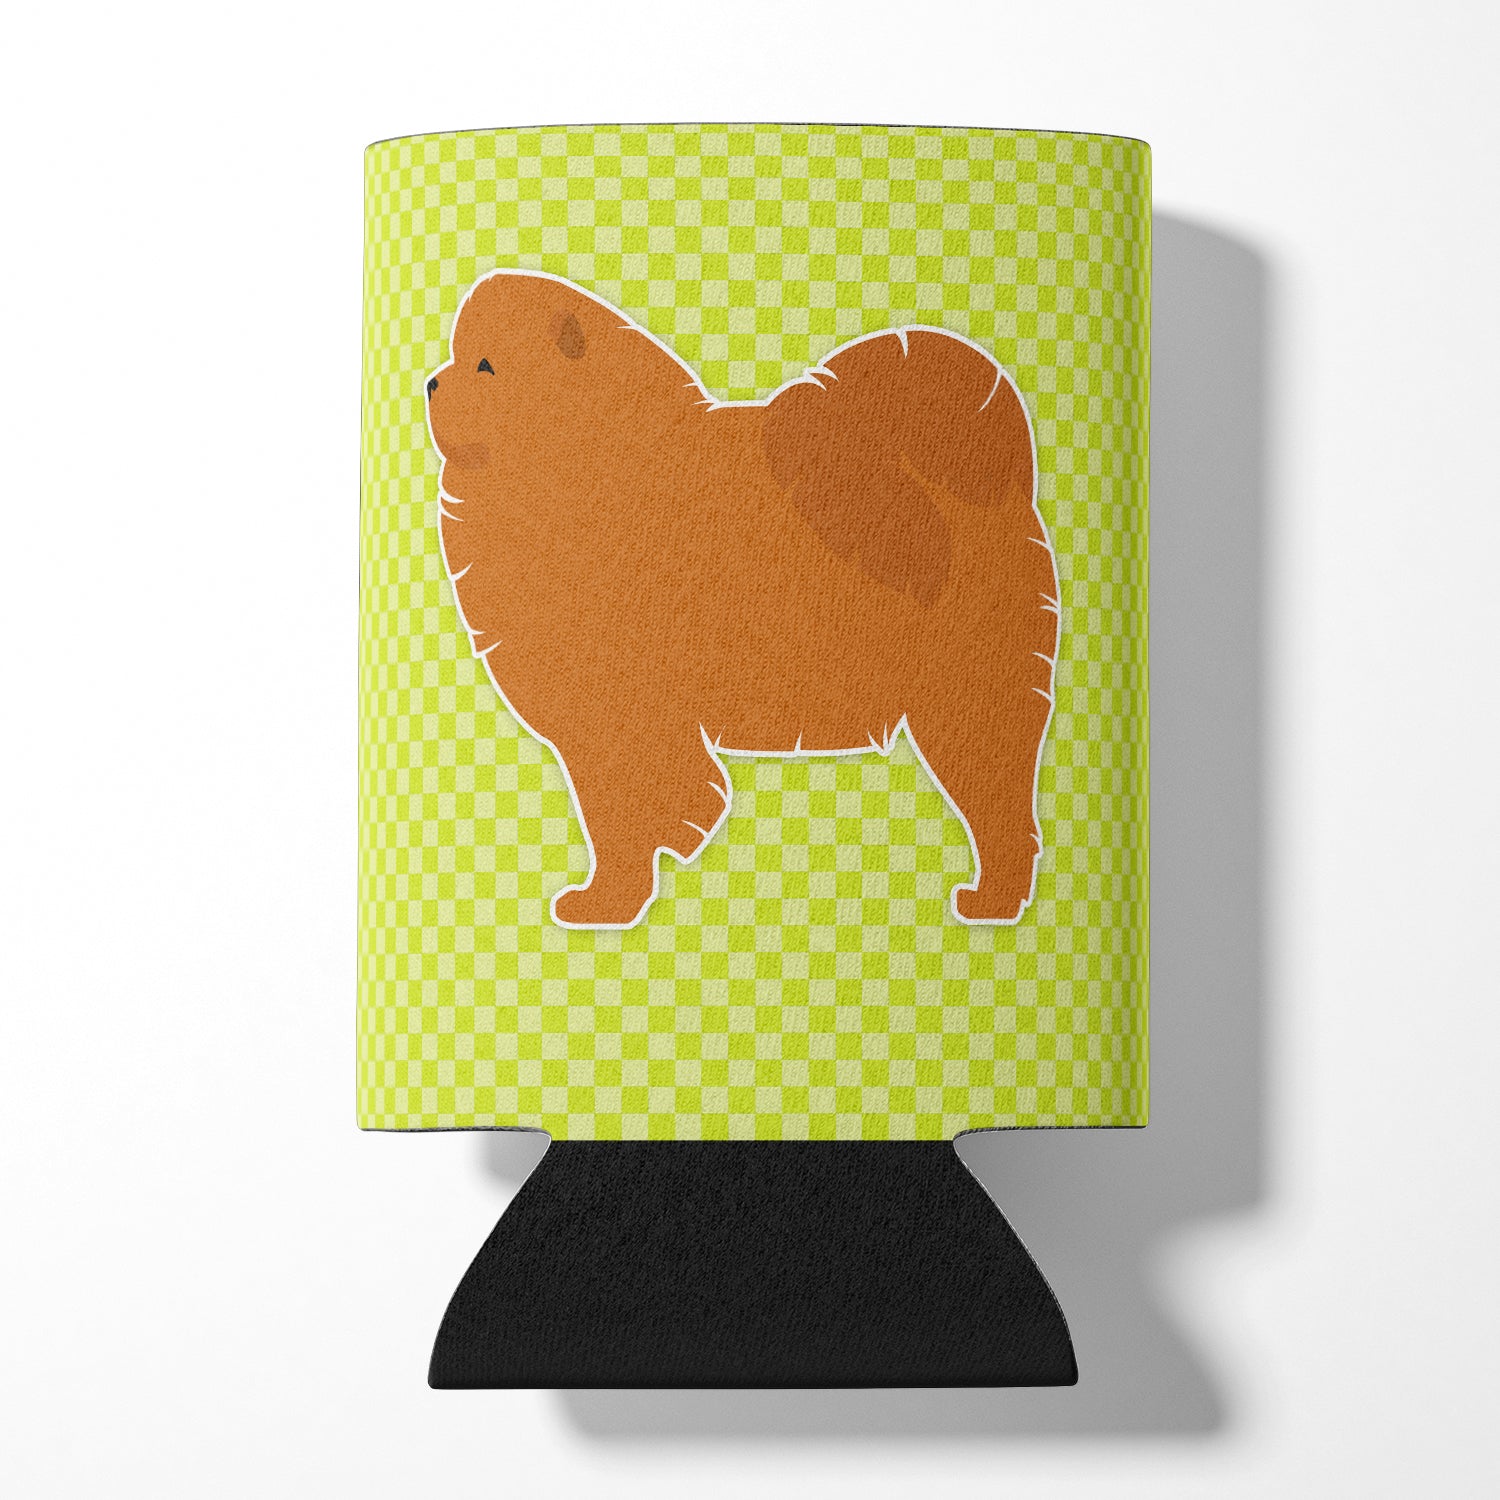 Chow Chow Checkerboard Green Can or Bottle Hugger BB3851CC  the-store.com.